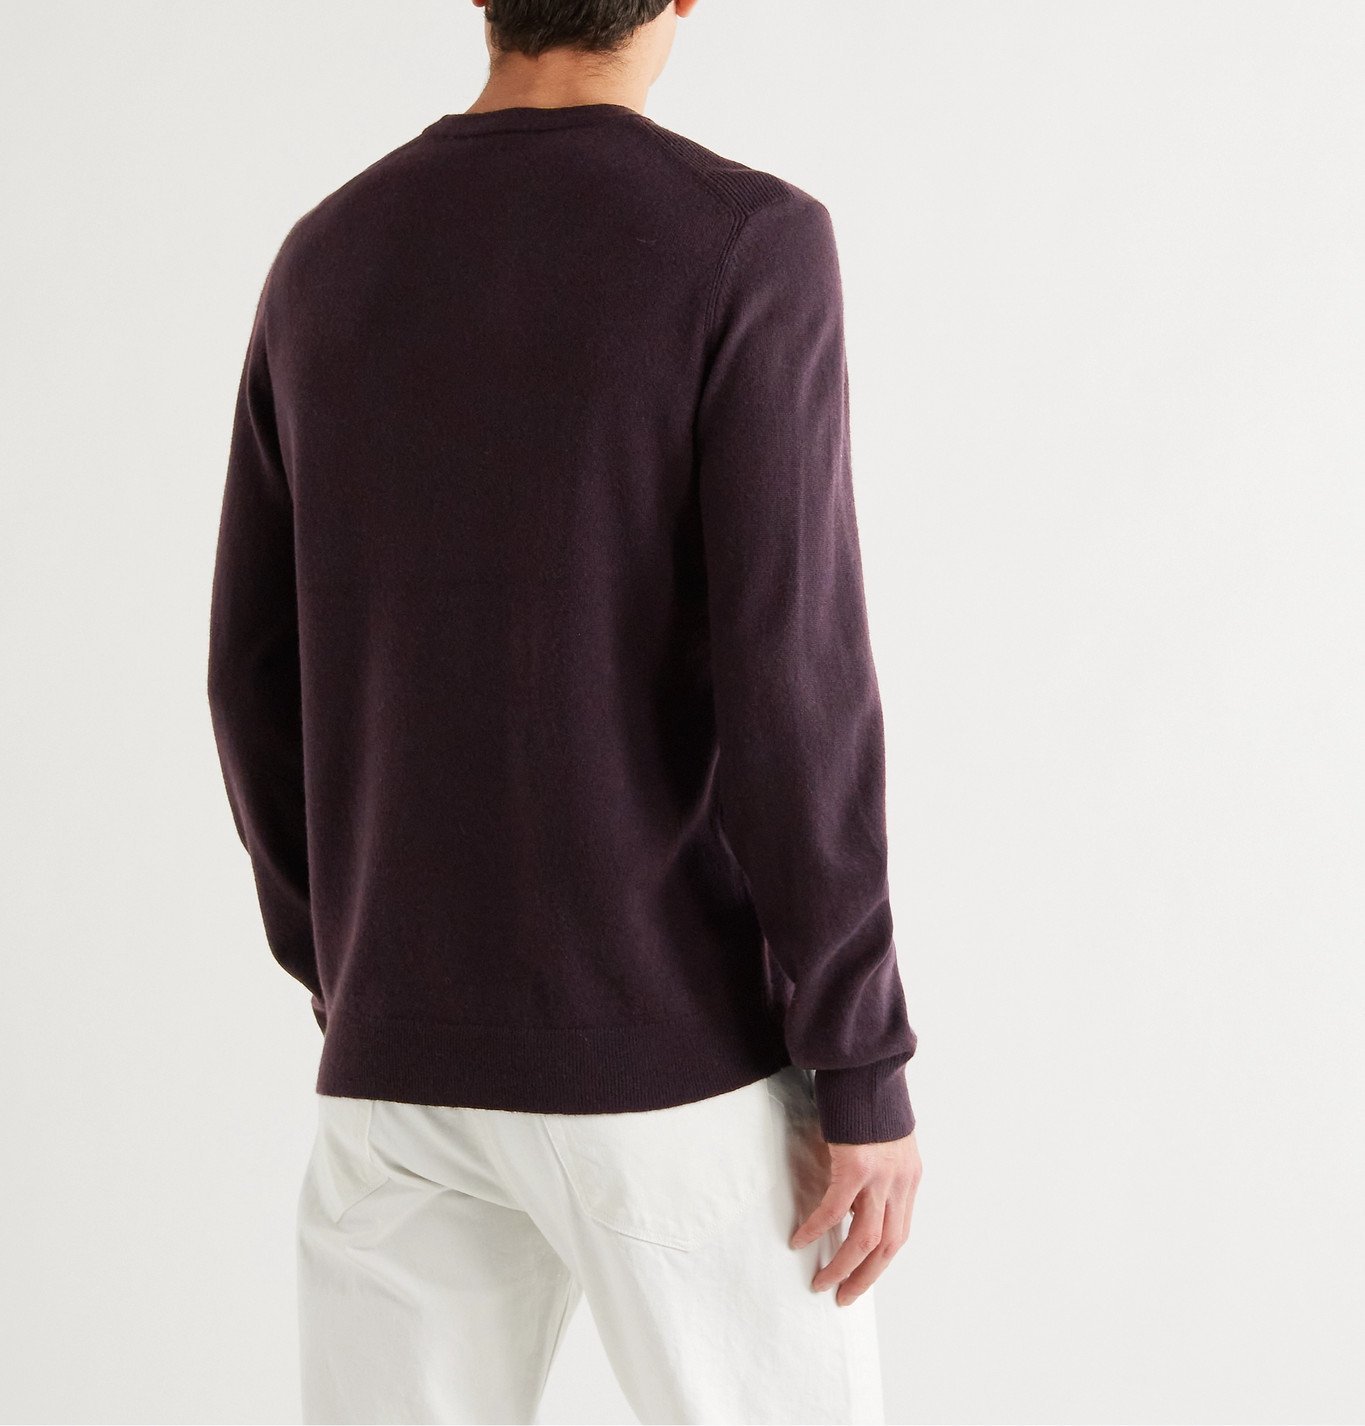 Theory - Hilles Cashmere Sweater - Purple Theory